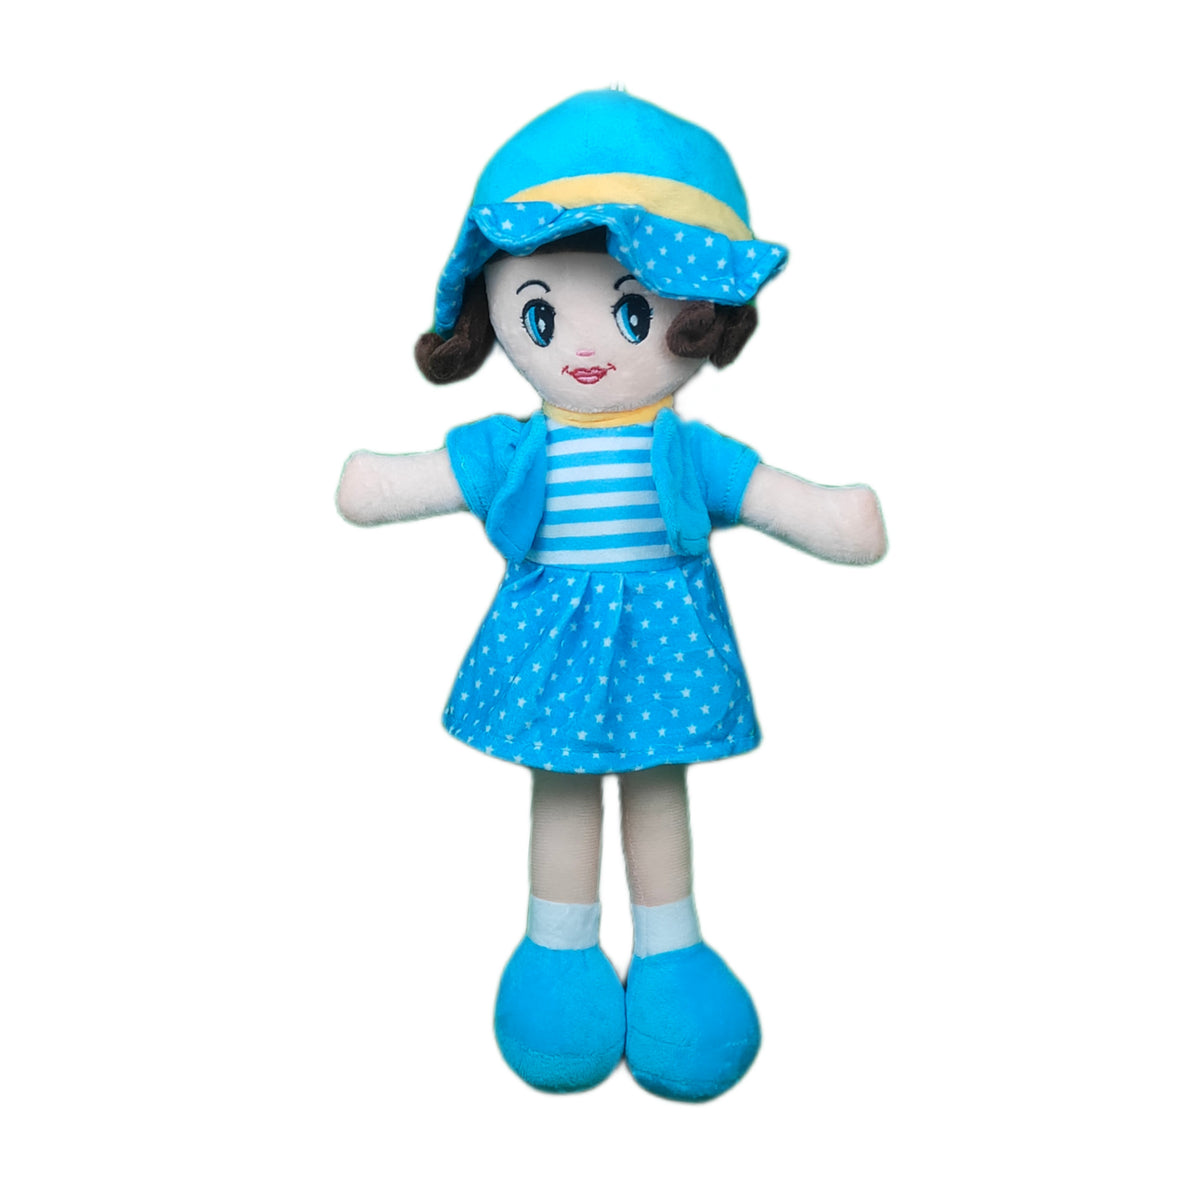 Play Hour Winky Rag Doll Plush Soft Toy Wearing Sky Dress for Ages 3 Years and Up, 40cm